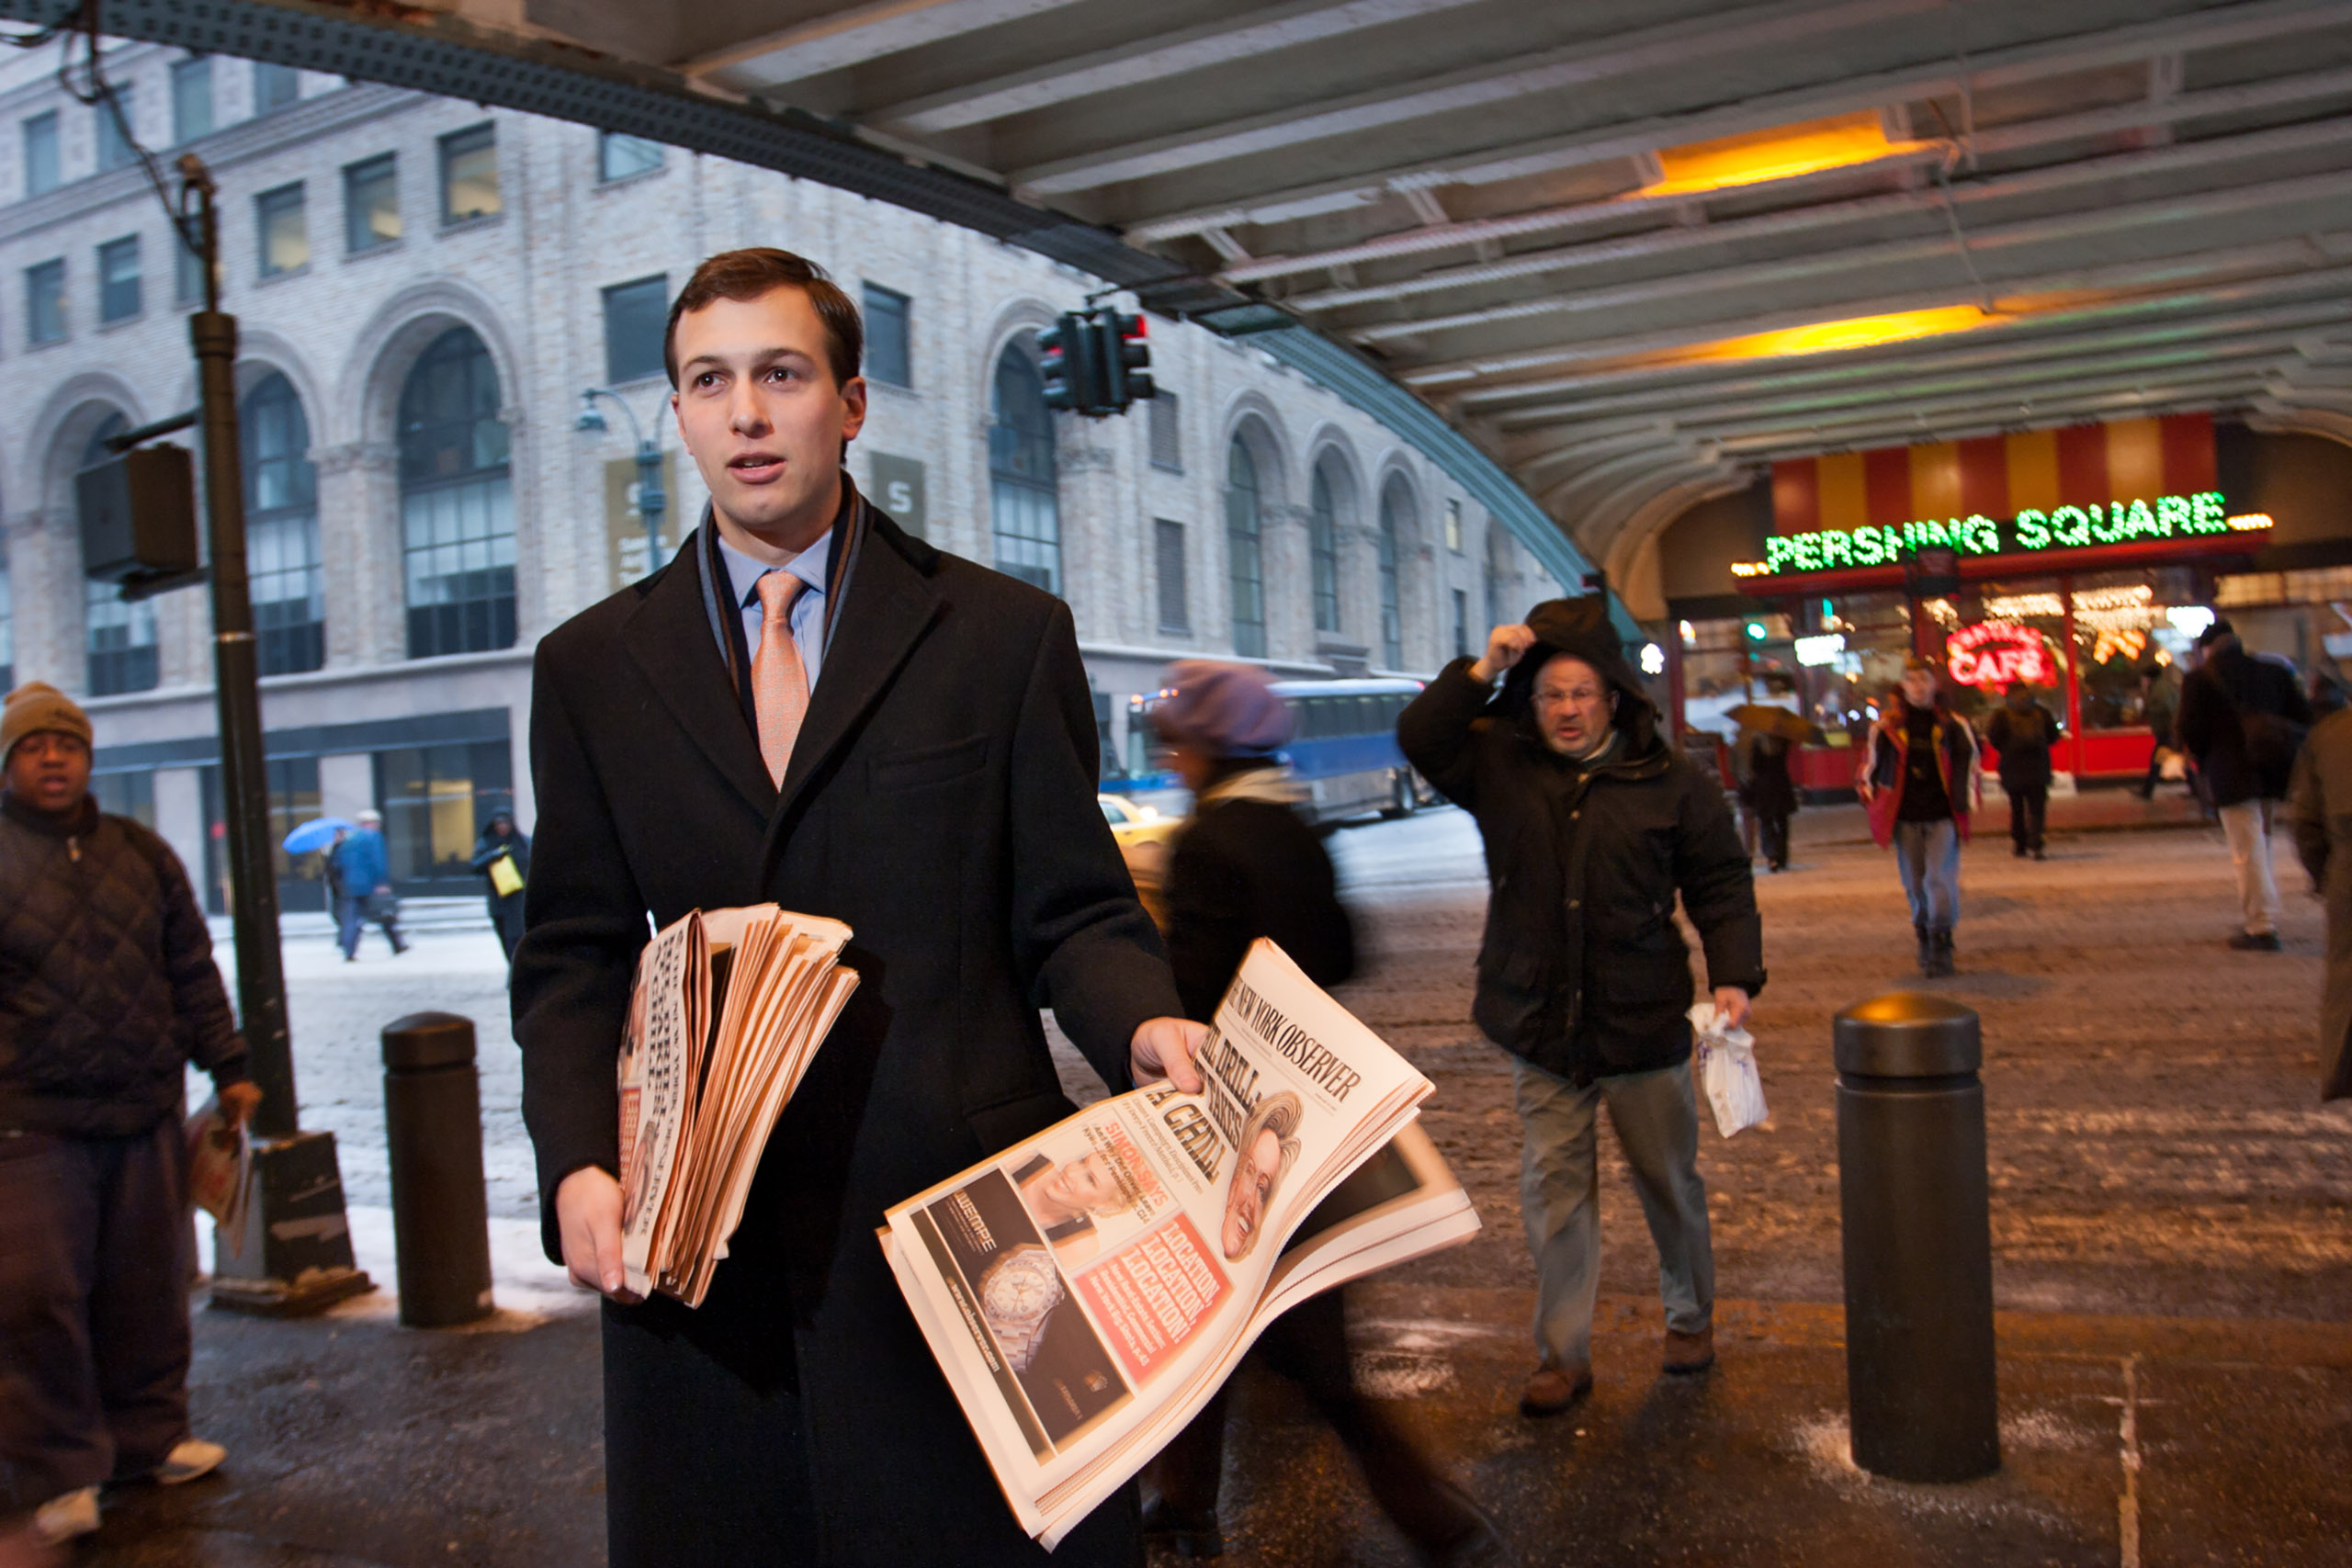 Jared Kushner handing out free copies of The New York Observer's first issue published under his new ownership, in front of Grand Central Station 42nd St., New York City, Feb. 14, 2007. (Joe Fornabaio)